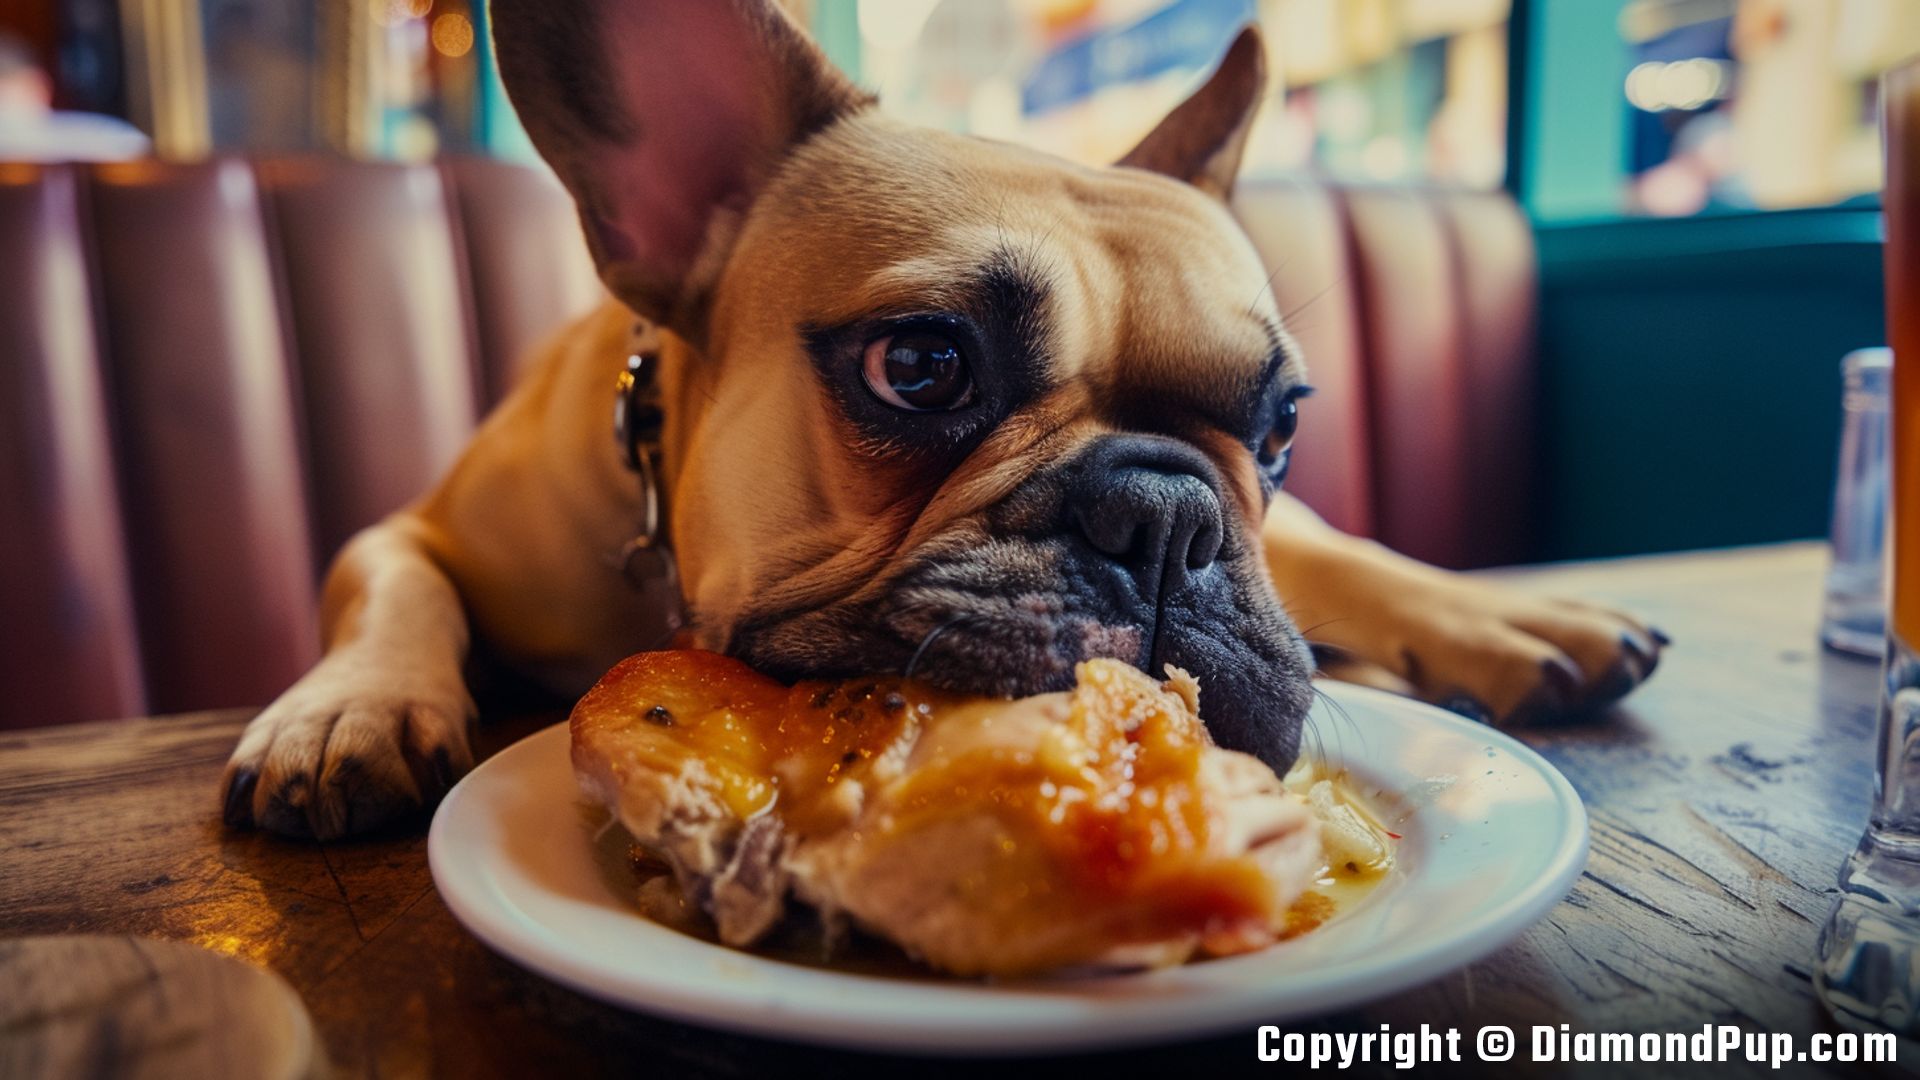 Photograph of a Happy French Bulldog Eating Chicken